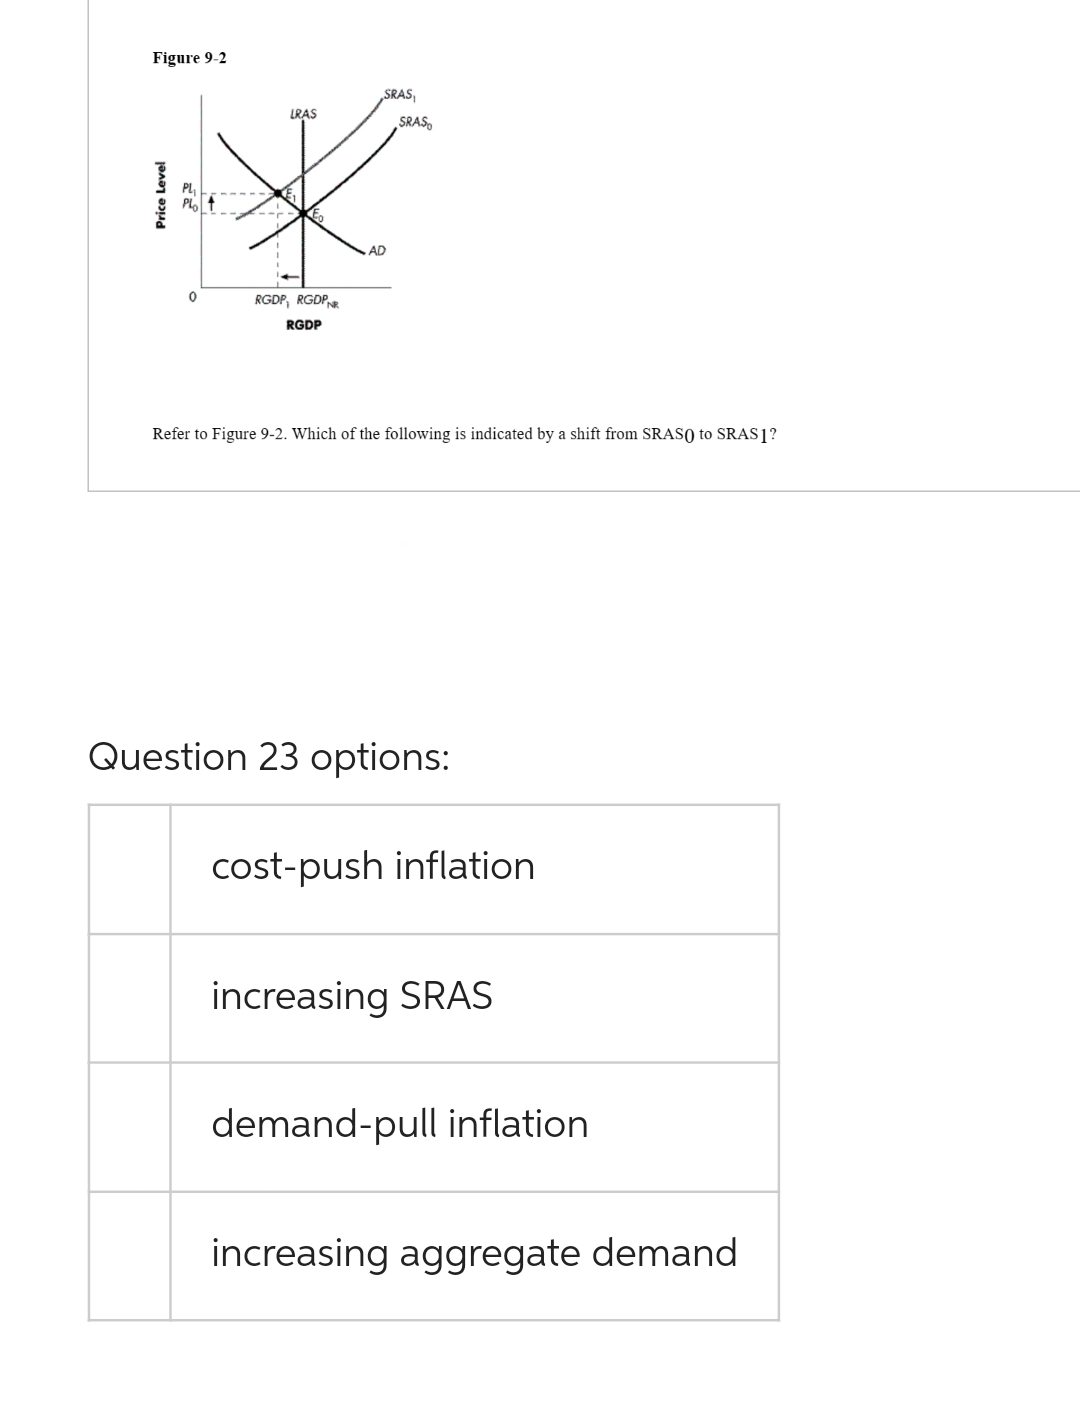 Figure 9-2
Price Level
LRAS
RGDP, RGDPR
RGDP
SRAS,
SRAS
AD
Refer to Figure 9-2. Which of the following is indicated by a shift from SRASO) to SRAS 1?
Question 23 options:
cost-push inflation
increasing SRAS
demand-pull inflation
increasing aggregate demand